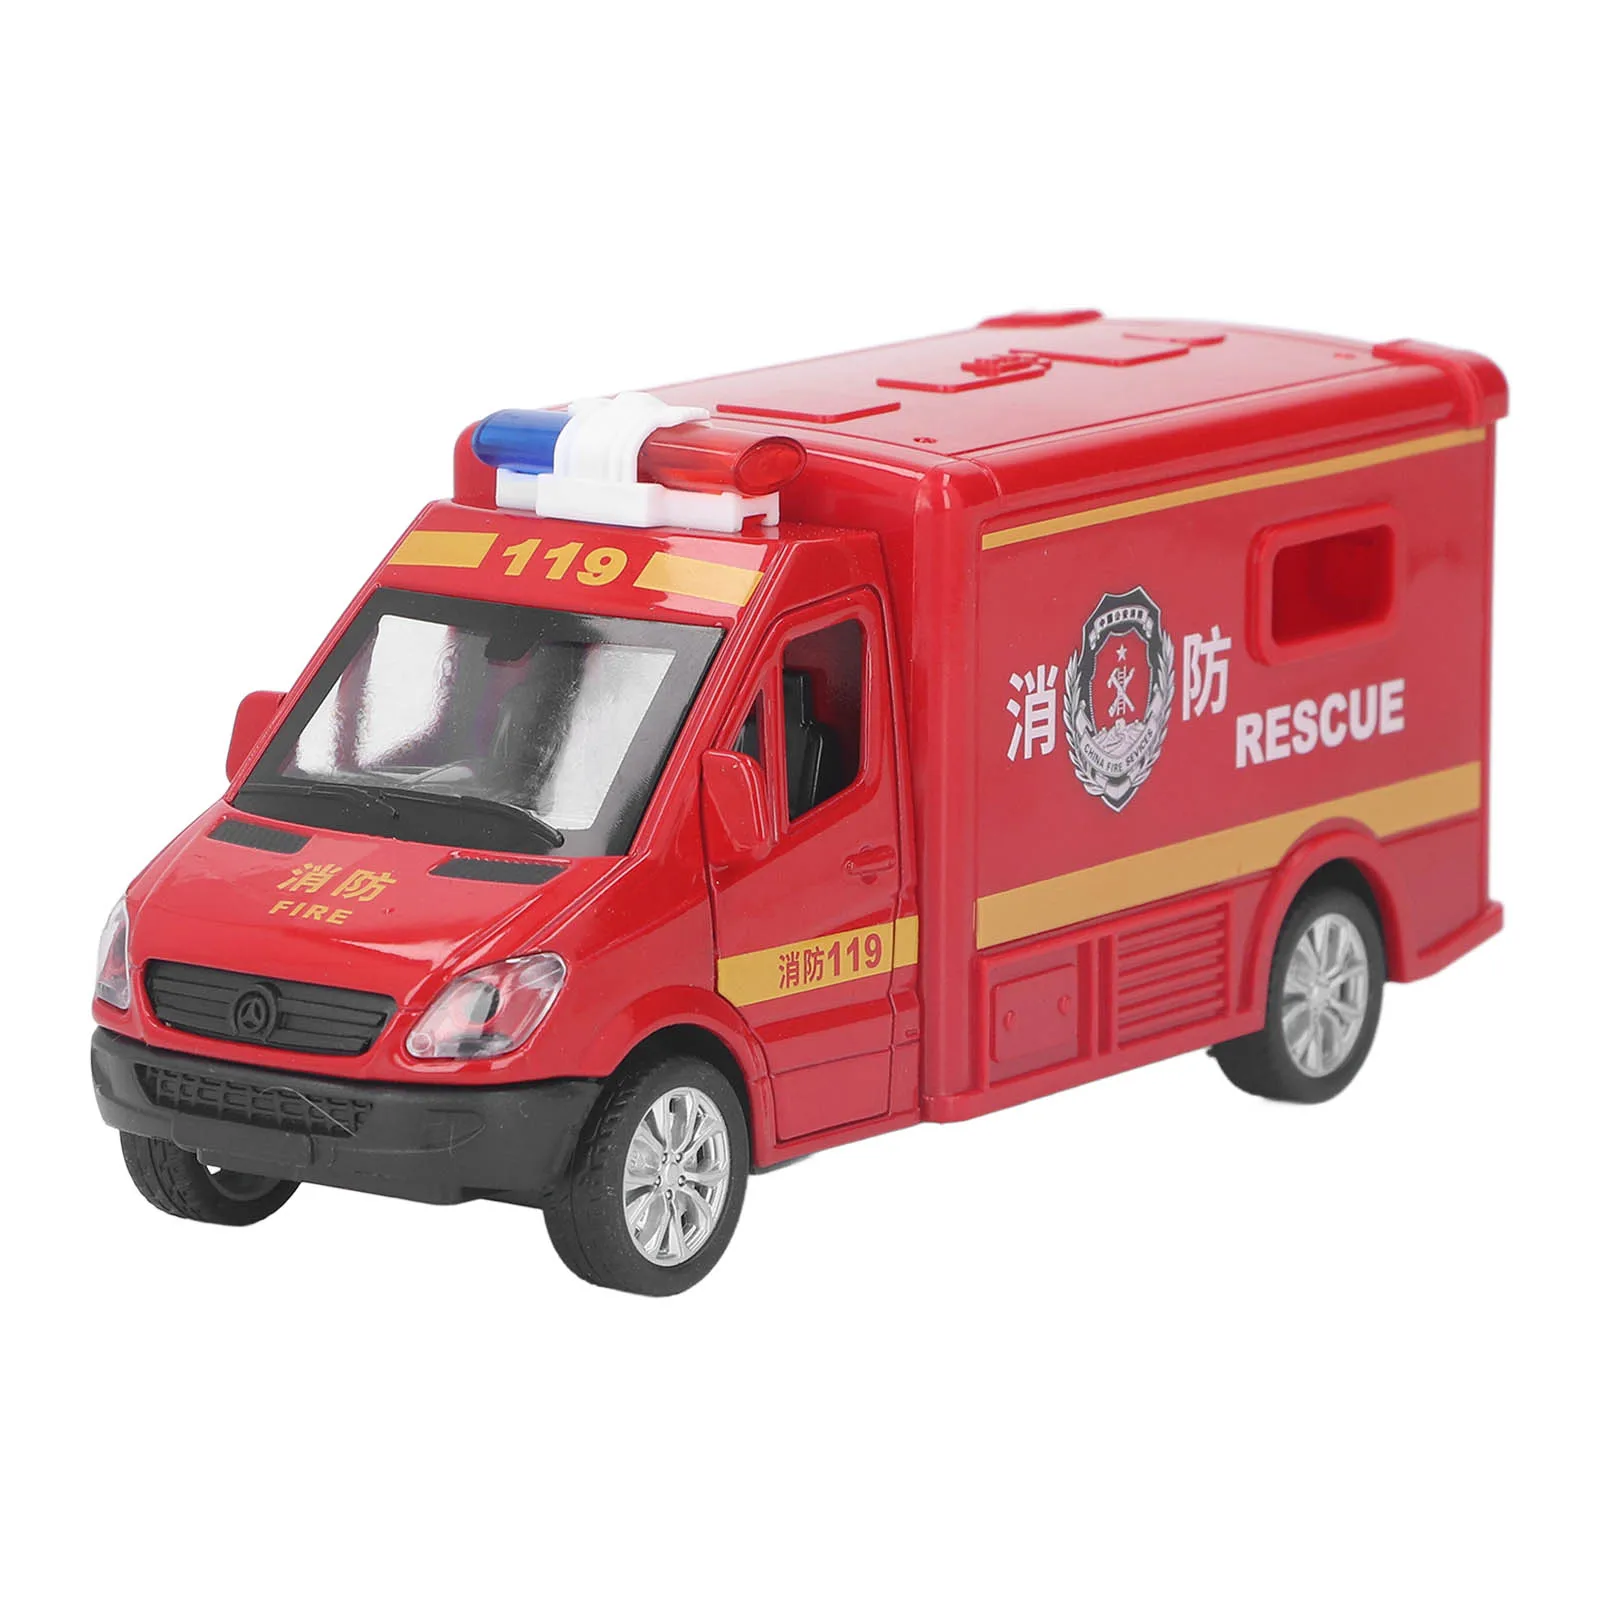 Fire Truck Alloy Simulation Car Model Innovative Sound and Lights Fire Truck Pull Back Fire Truck Toy for Kids Gifts Collection diecast carrier truck fire engine car toys engineering vehicles excavator bulldozer truck model sets children boys toys gift